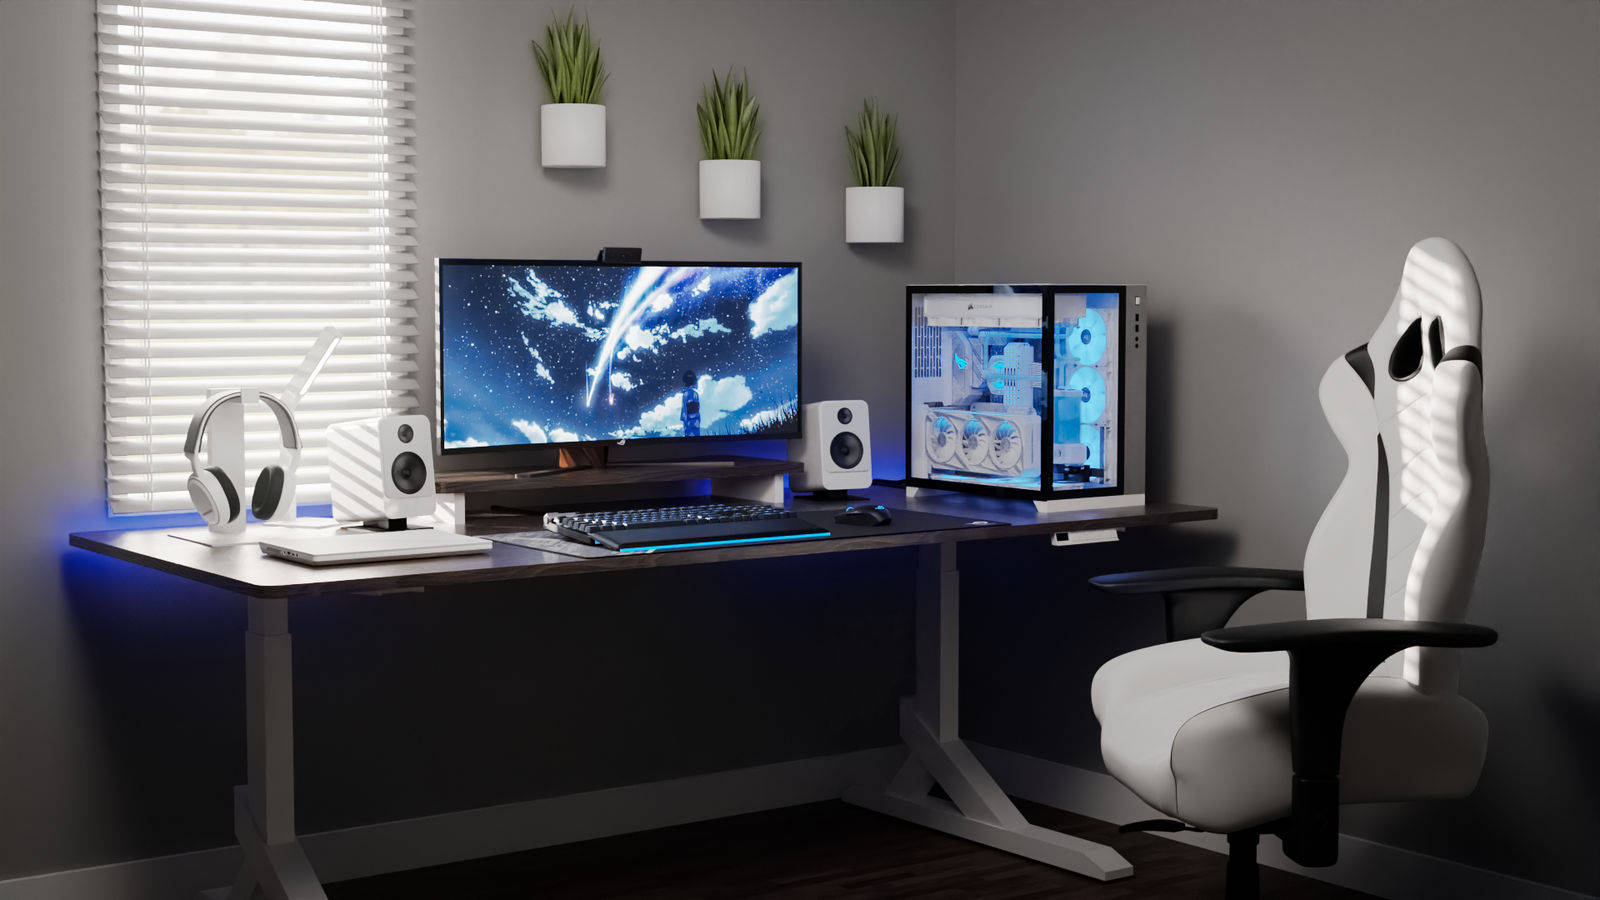 Upgrade your workstation with the stylish white PC Wallpaper